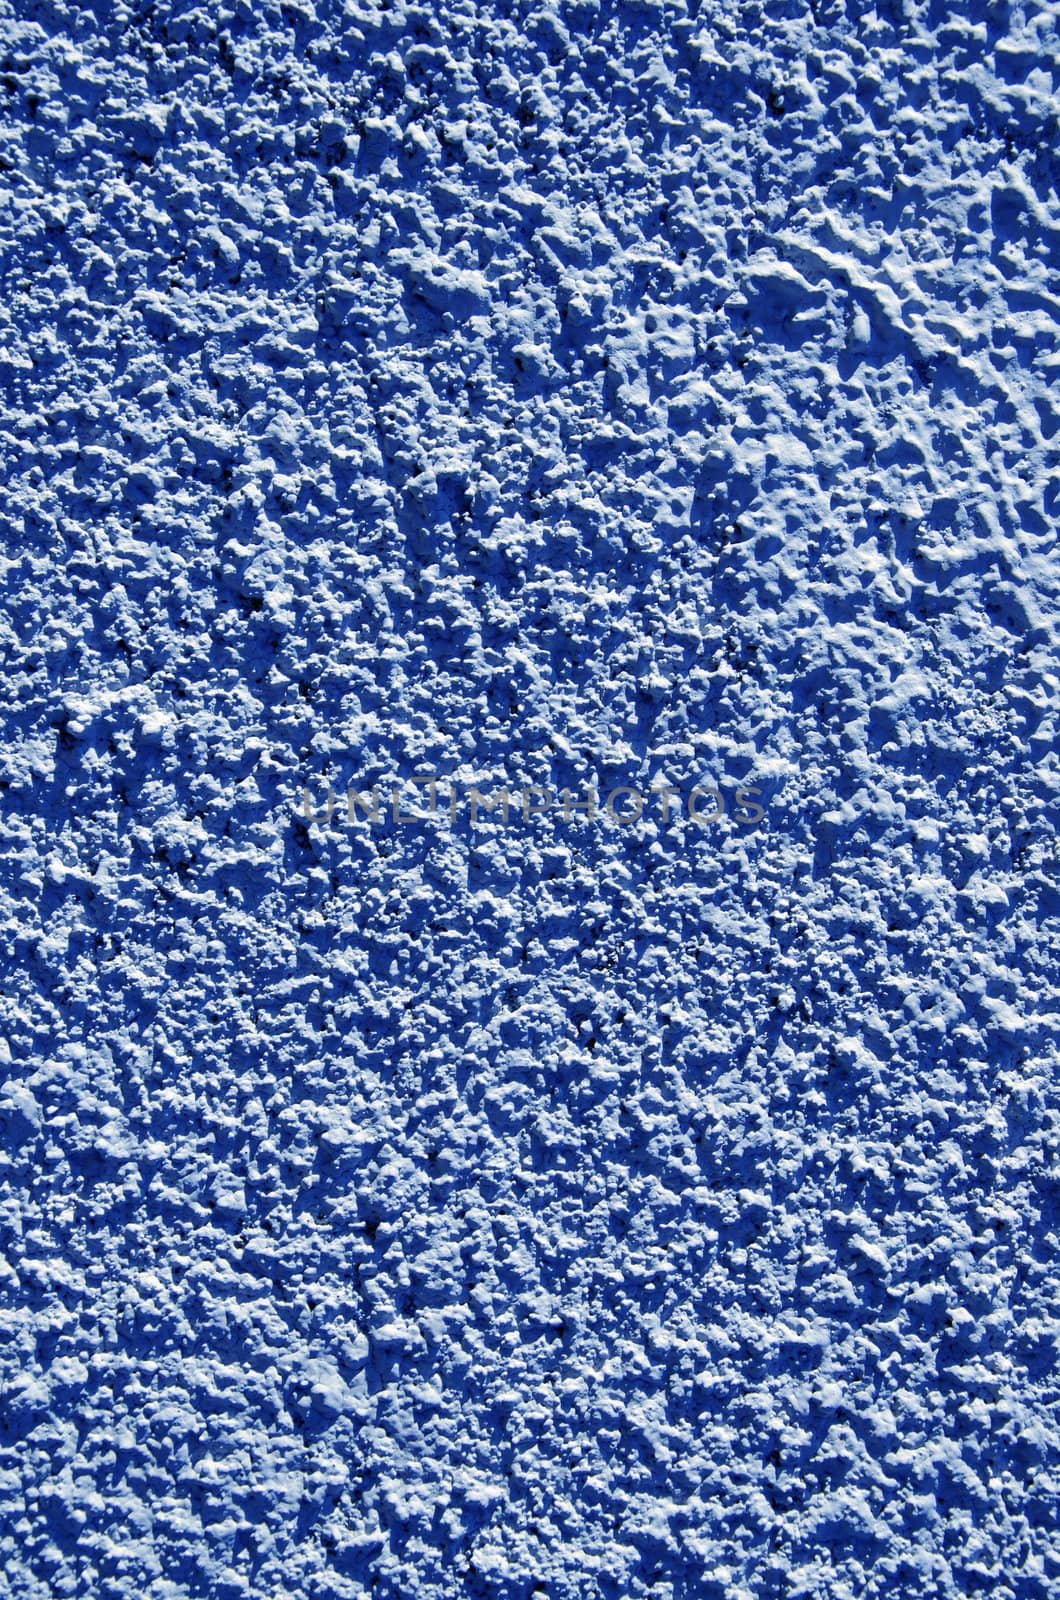 Blue painted textured walls closeup macro background details.